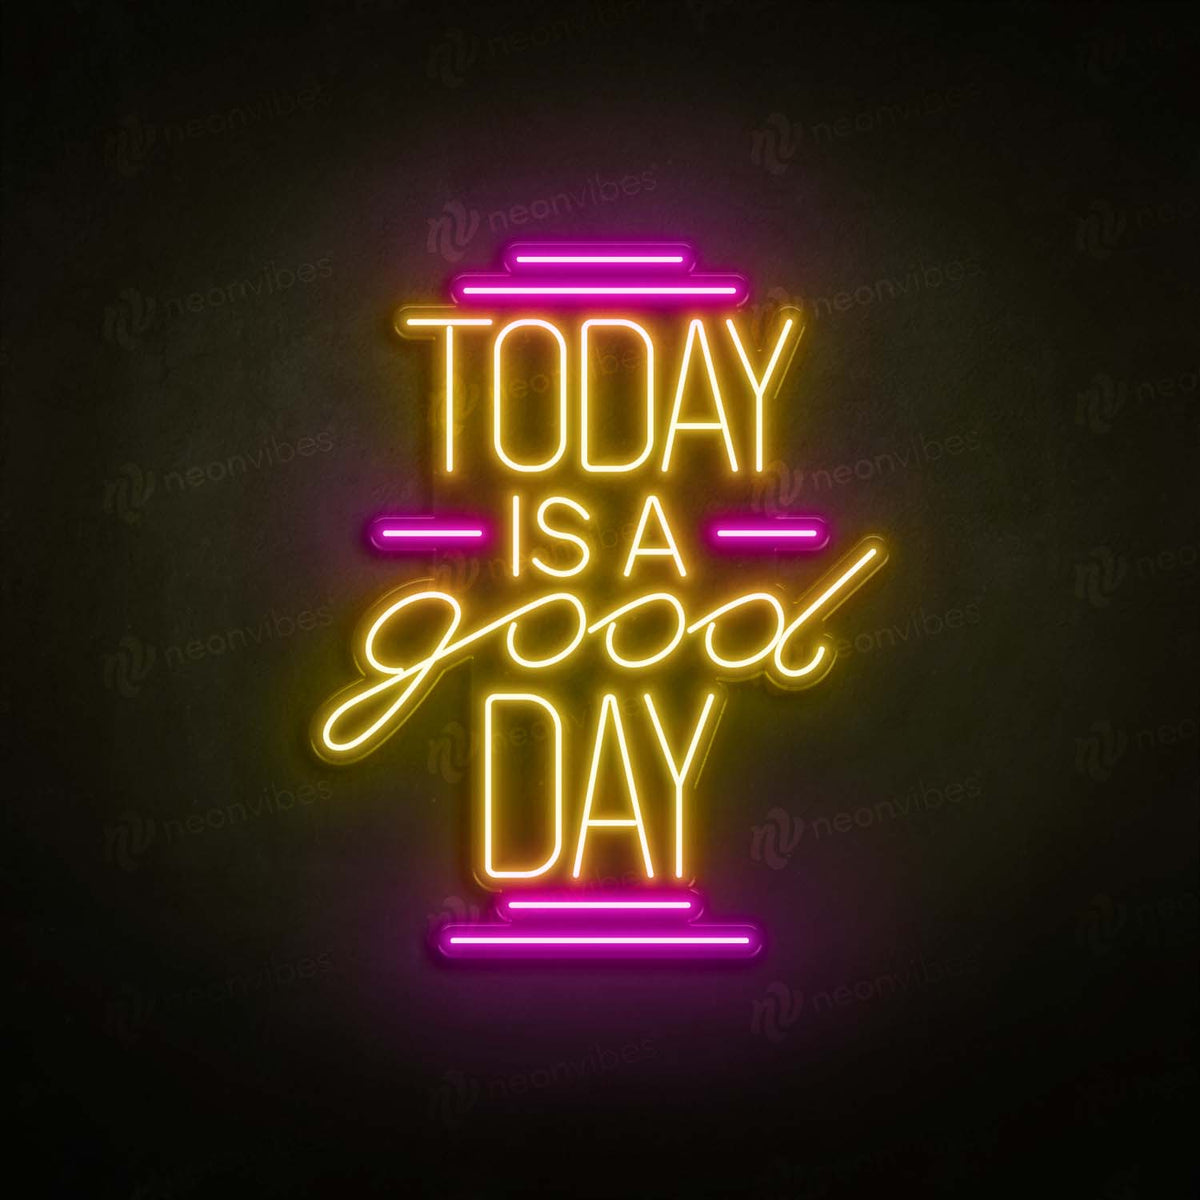 Today is a good day neon sign